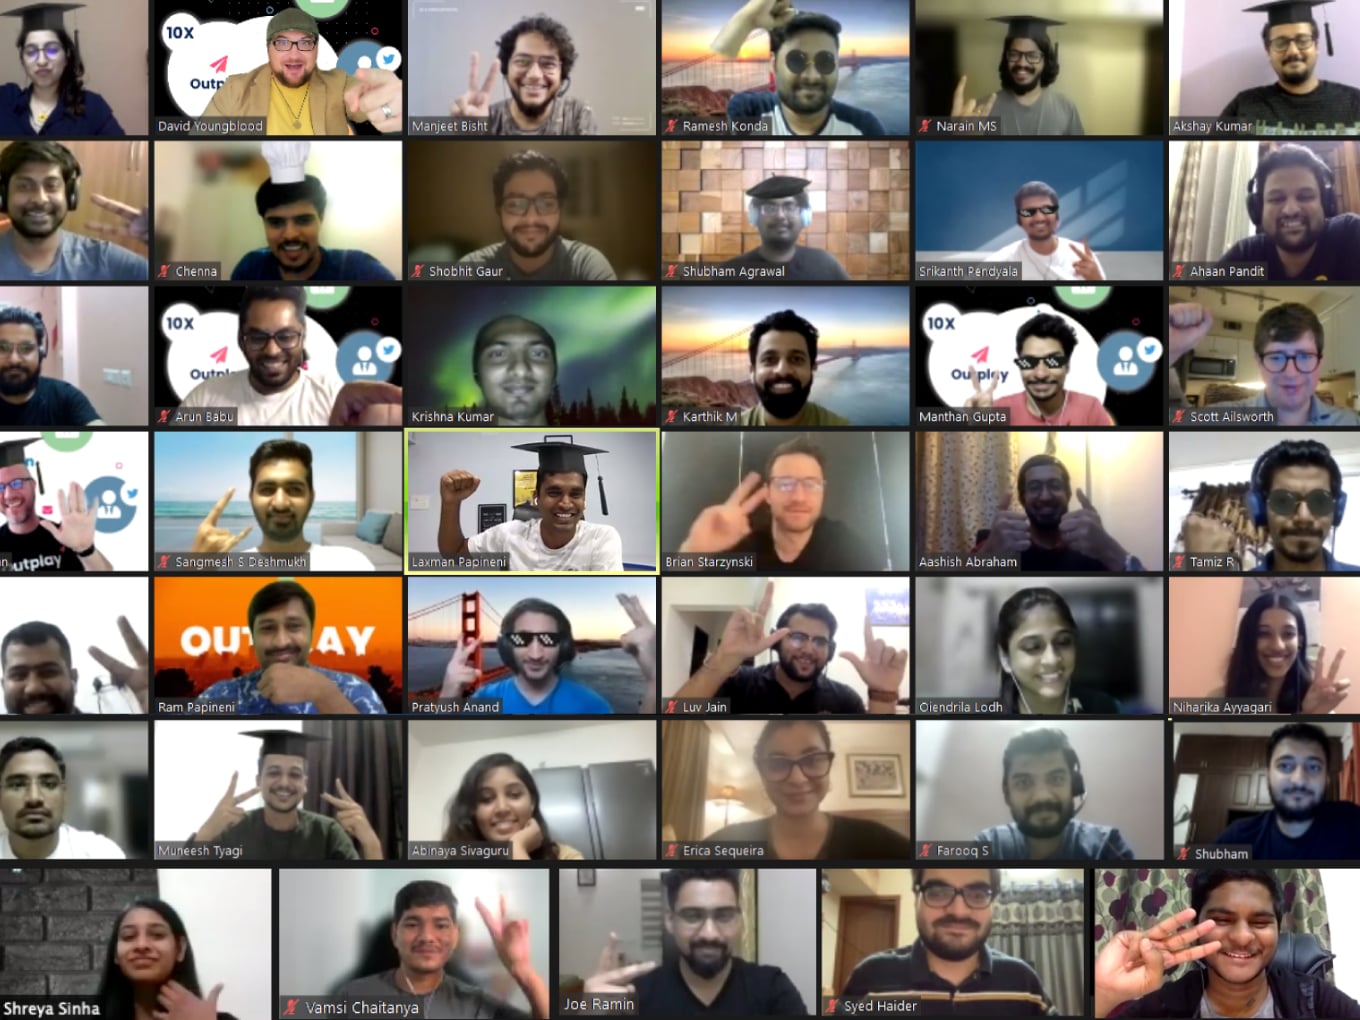 Sales Engagement Platform Outplay Bags $7.3 Mn From Sequoia Capital India